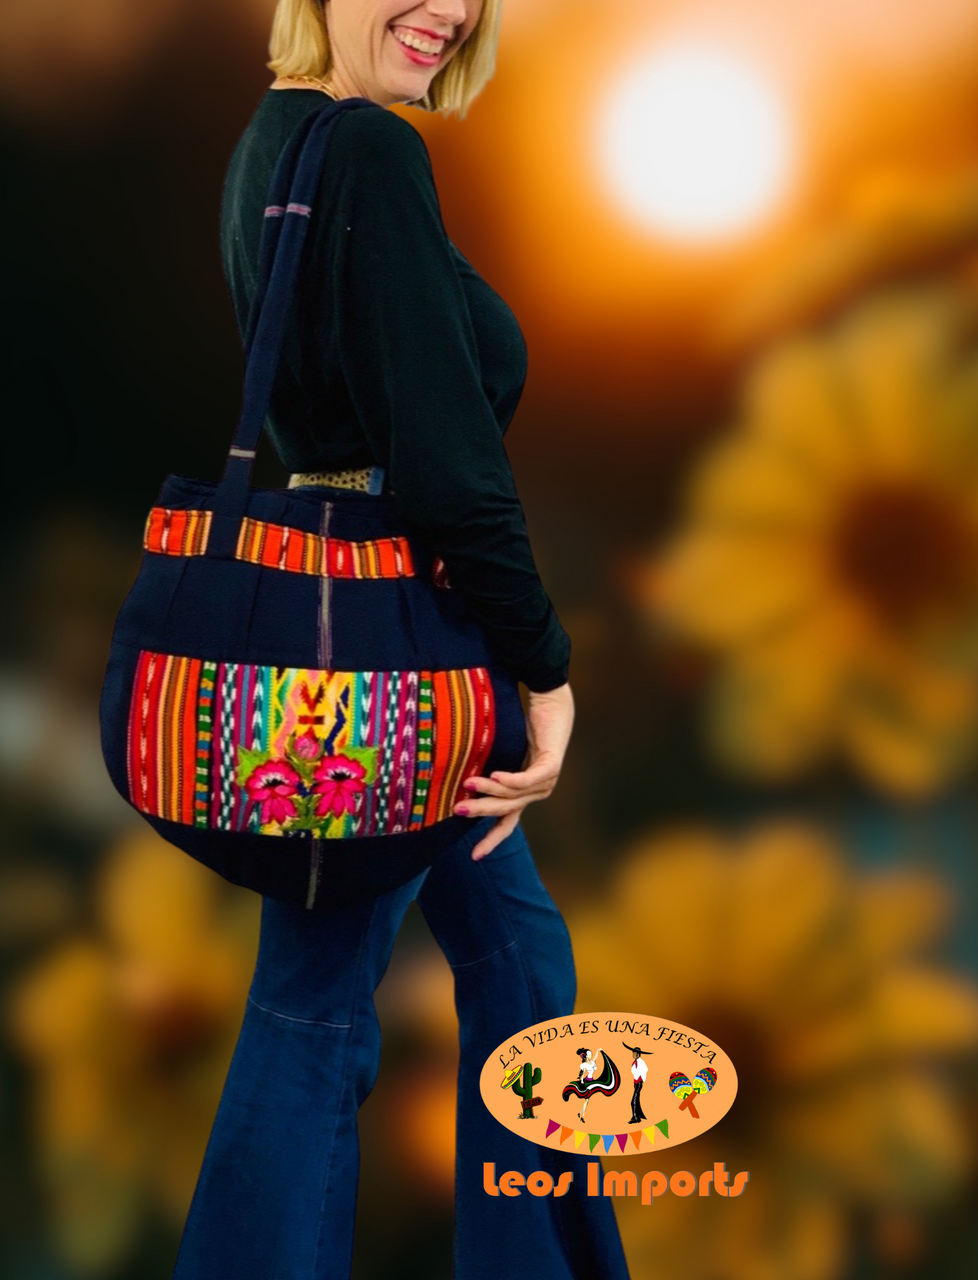 TRADITIONAL EMBELLISHED POTLI BAG/PURSE/CLUTCH/BATWA WITH AMAZING PEARL  HANDLE AND BEAUTIFUL WORK FOR WOMEN